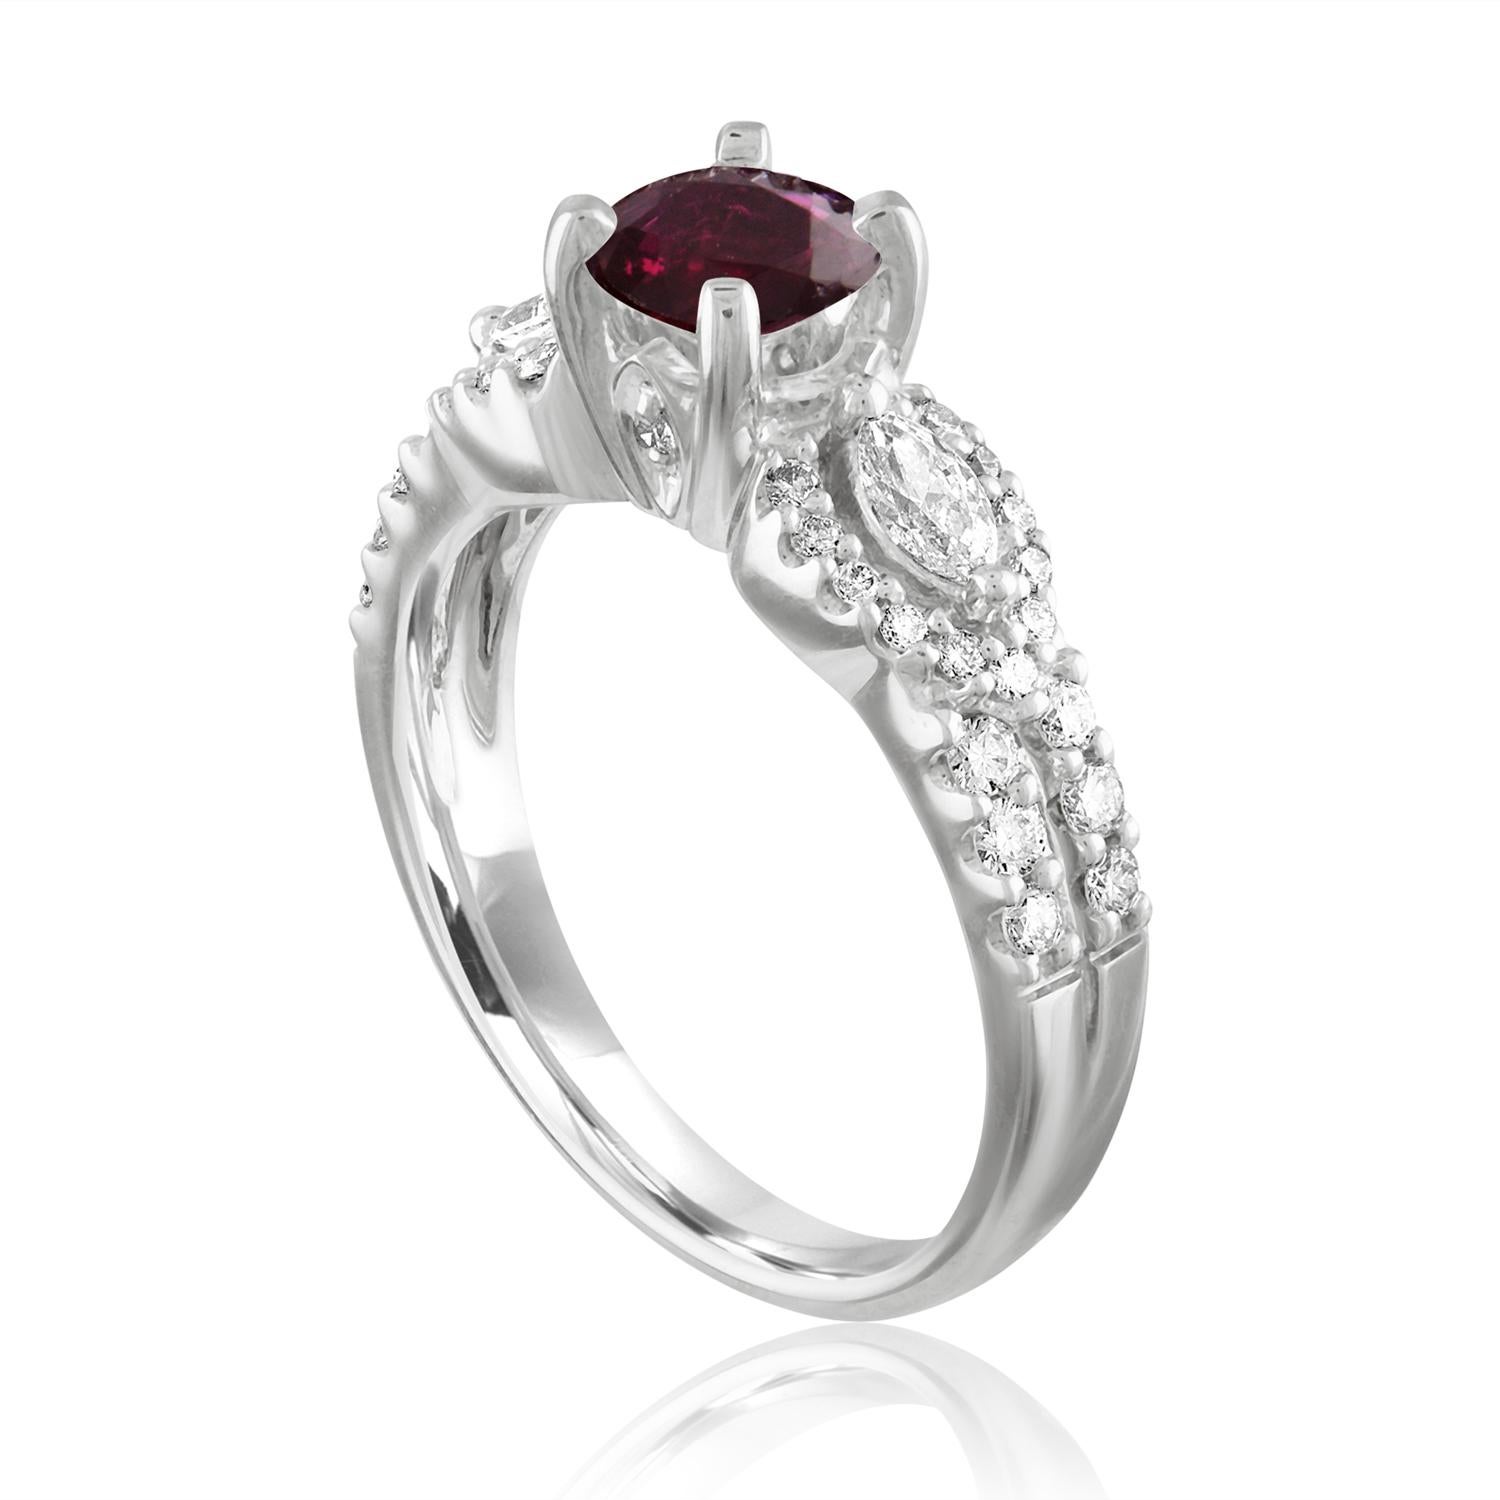 Beautiful Round Halo Split Shank Ring
The ring is 18K White Gold
The Center Stone is a Round Ruby 1.02 Carats
The Ruby is AGL Certified Heated
There are 0.50 Carats in Diamonds F/G VS/SI
The ring is a size 6.5, sizable.
The ring weighs 5.4 grams